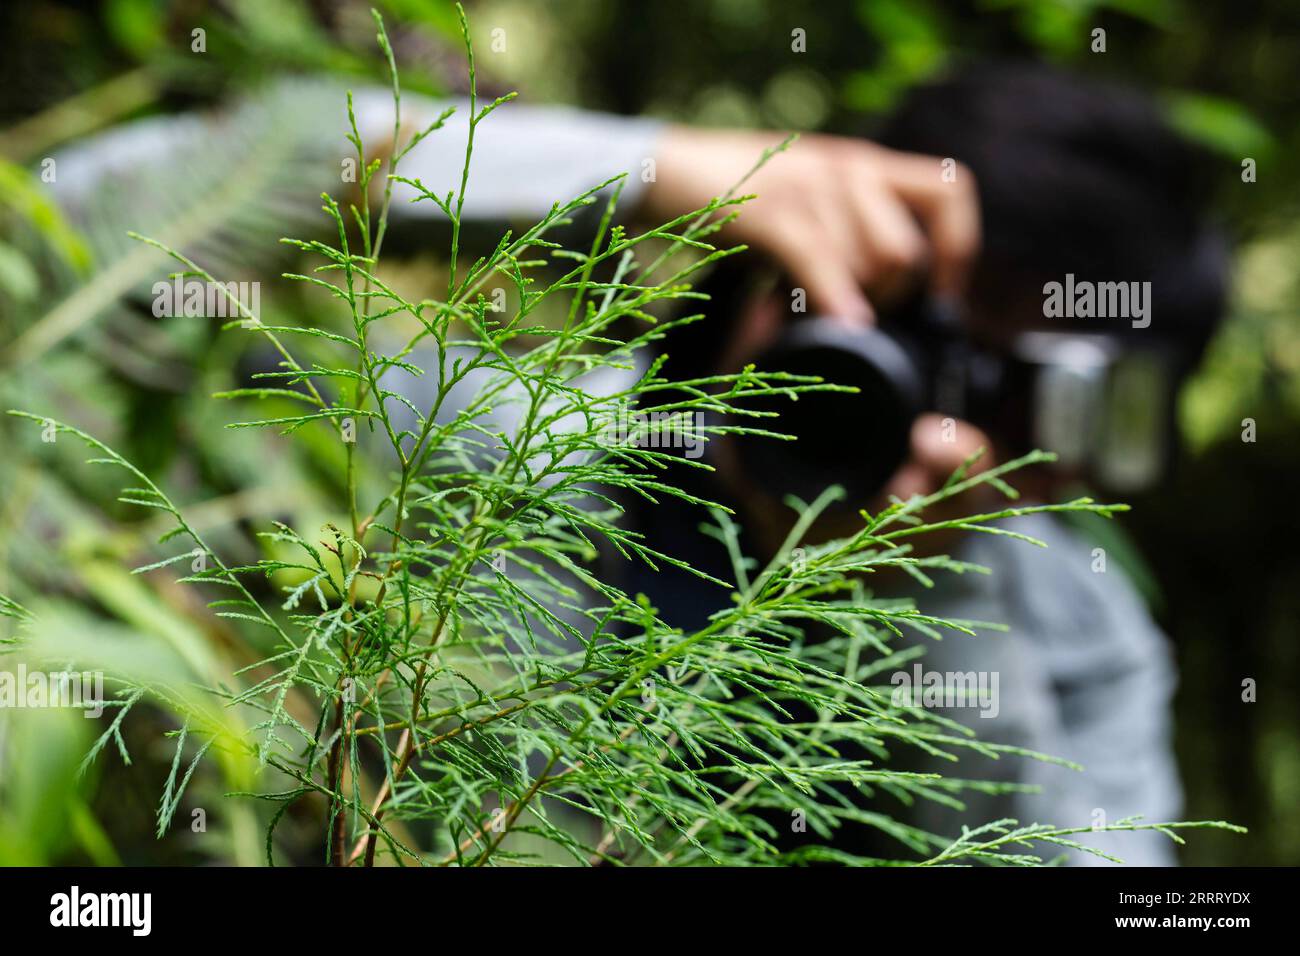 230618 -- NYINGCHI, June 18, 2023 -- Wang Zi takes pictures of a Cupressus torulosa sapling at the national nature reserve of the Yarlung Zangbo Grand Canyon in Bome County, Nyingchi City, southwest China s Tibet Autonomous Region, June 15, 2023. The record of the tallest tree in the Chinese mainland has been refreshed several times in the past year or so. Last year in April, a research team led by Peking University found a 76.8-meter tree in Medog County in southwest China s Tibet Autonomous Region, marking China s tallest tree at the time. The record was broken a month later when an 83.2-met Stock Photo